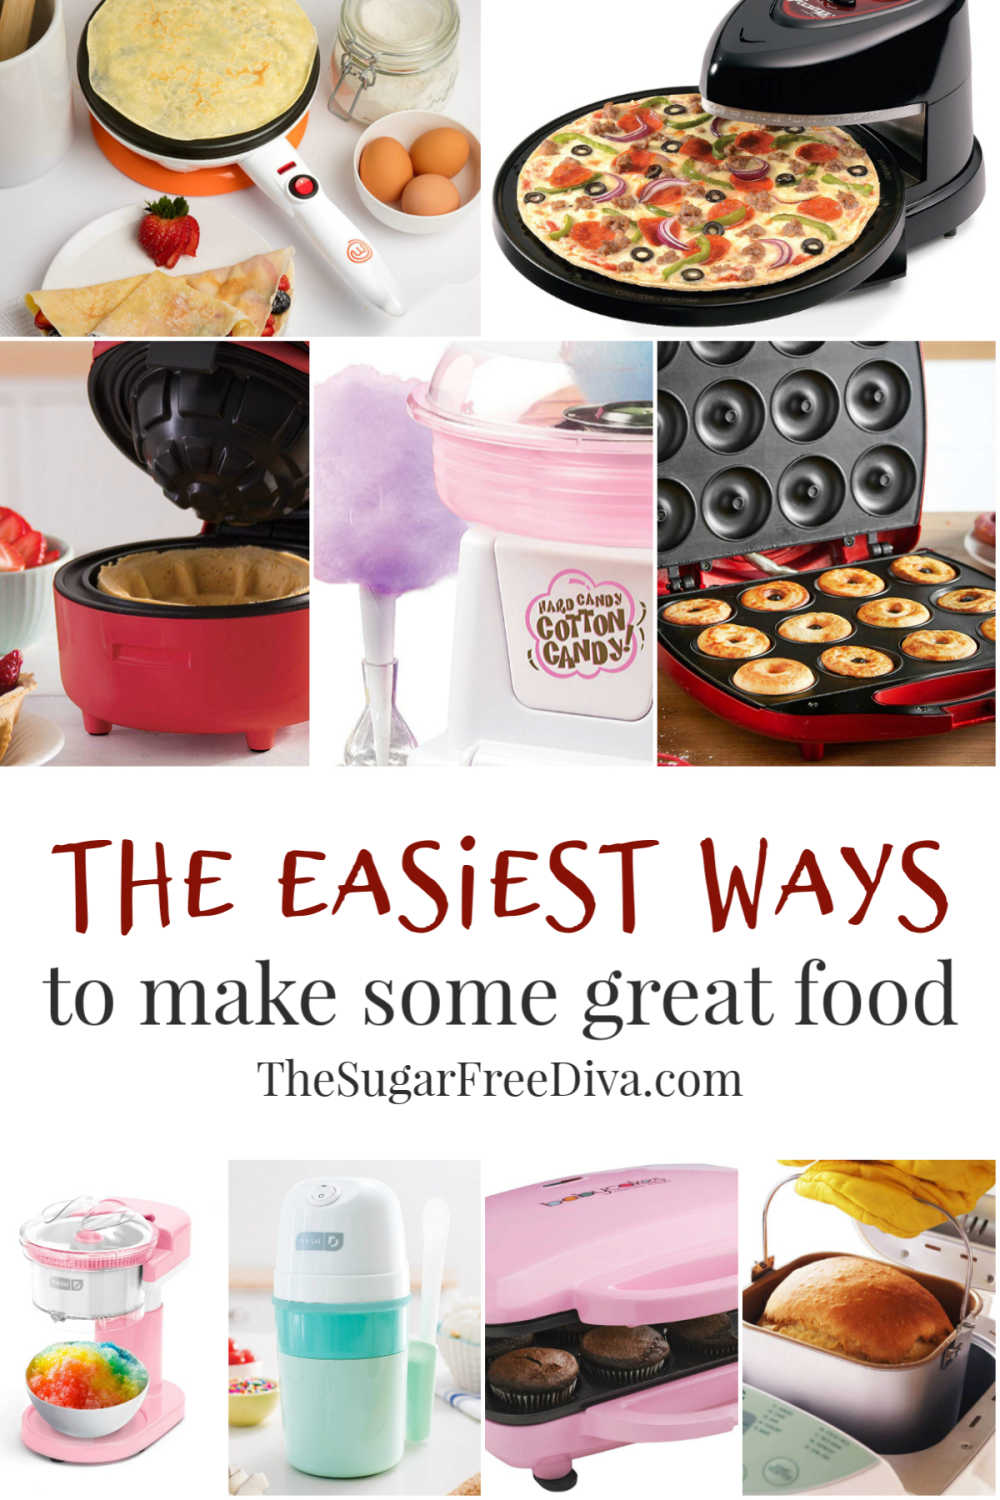 The Easiest Ways to Make Some Great Food